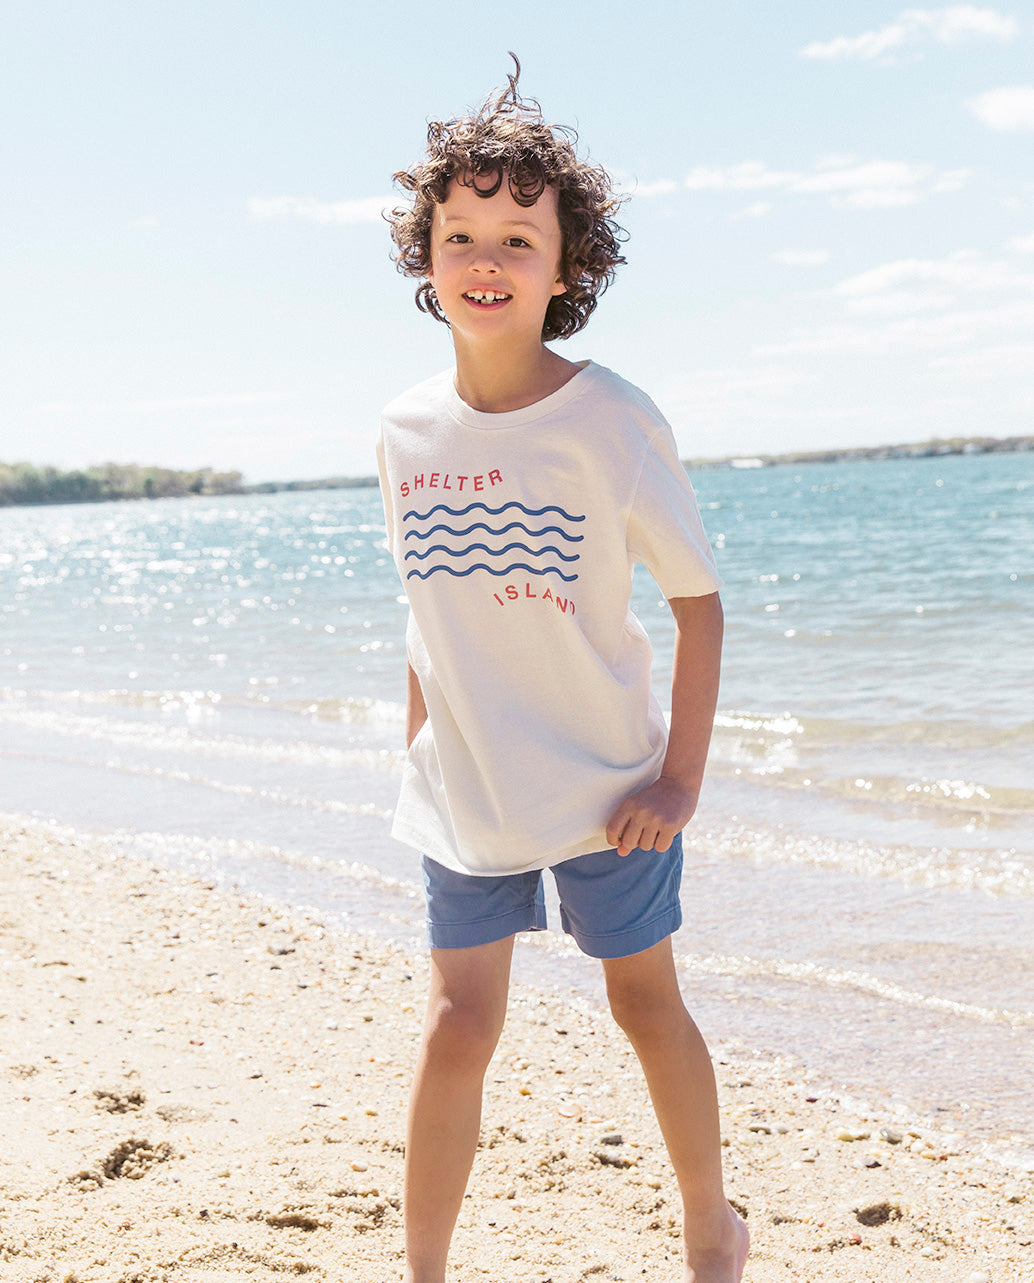 Surf Wave Youth Shelter Island Tee, Natural